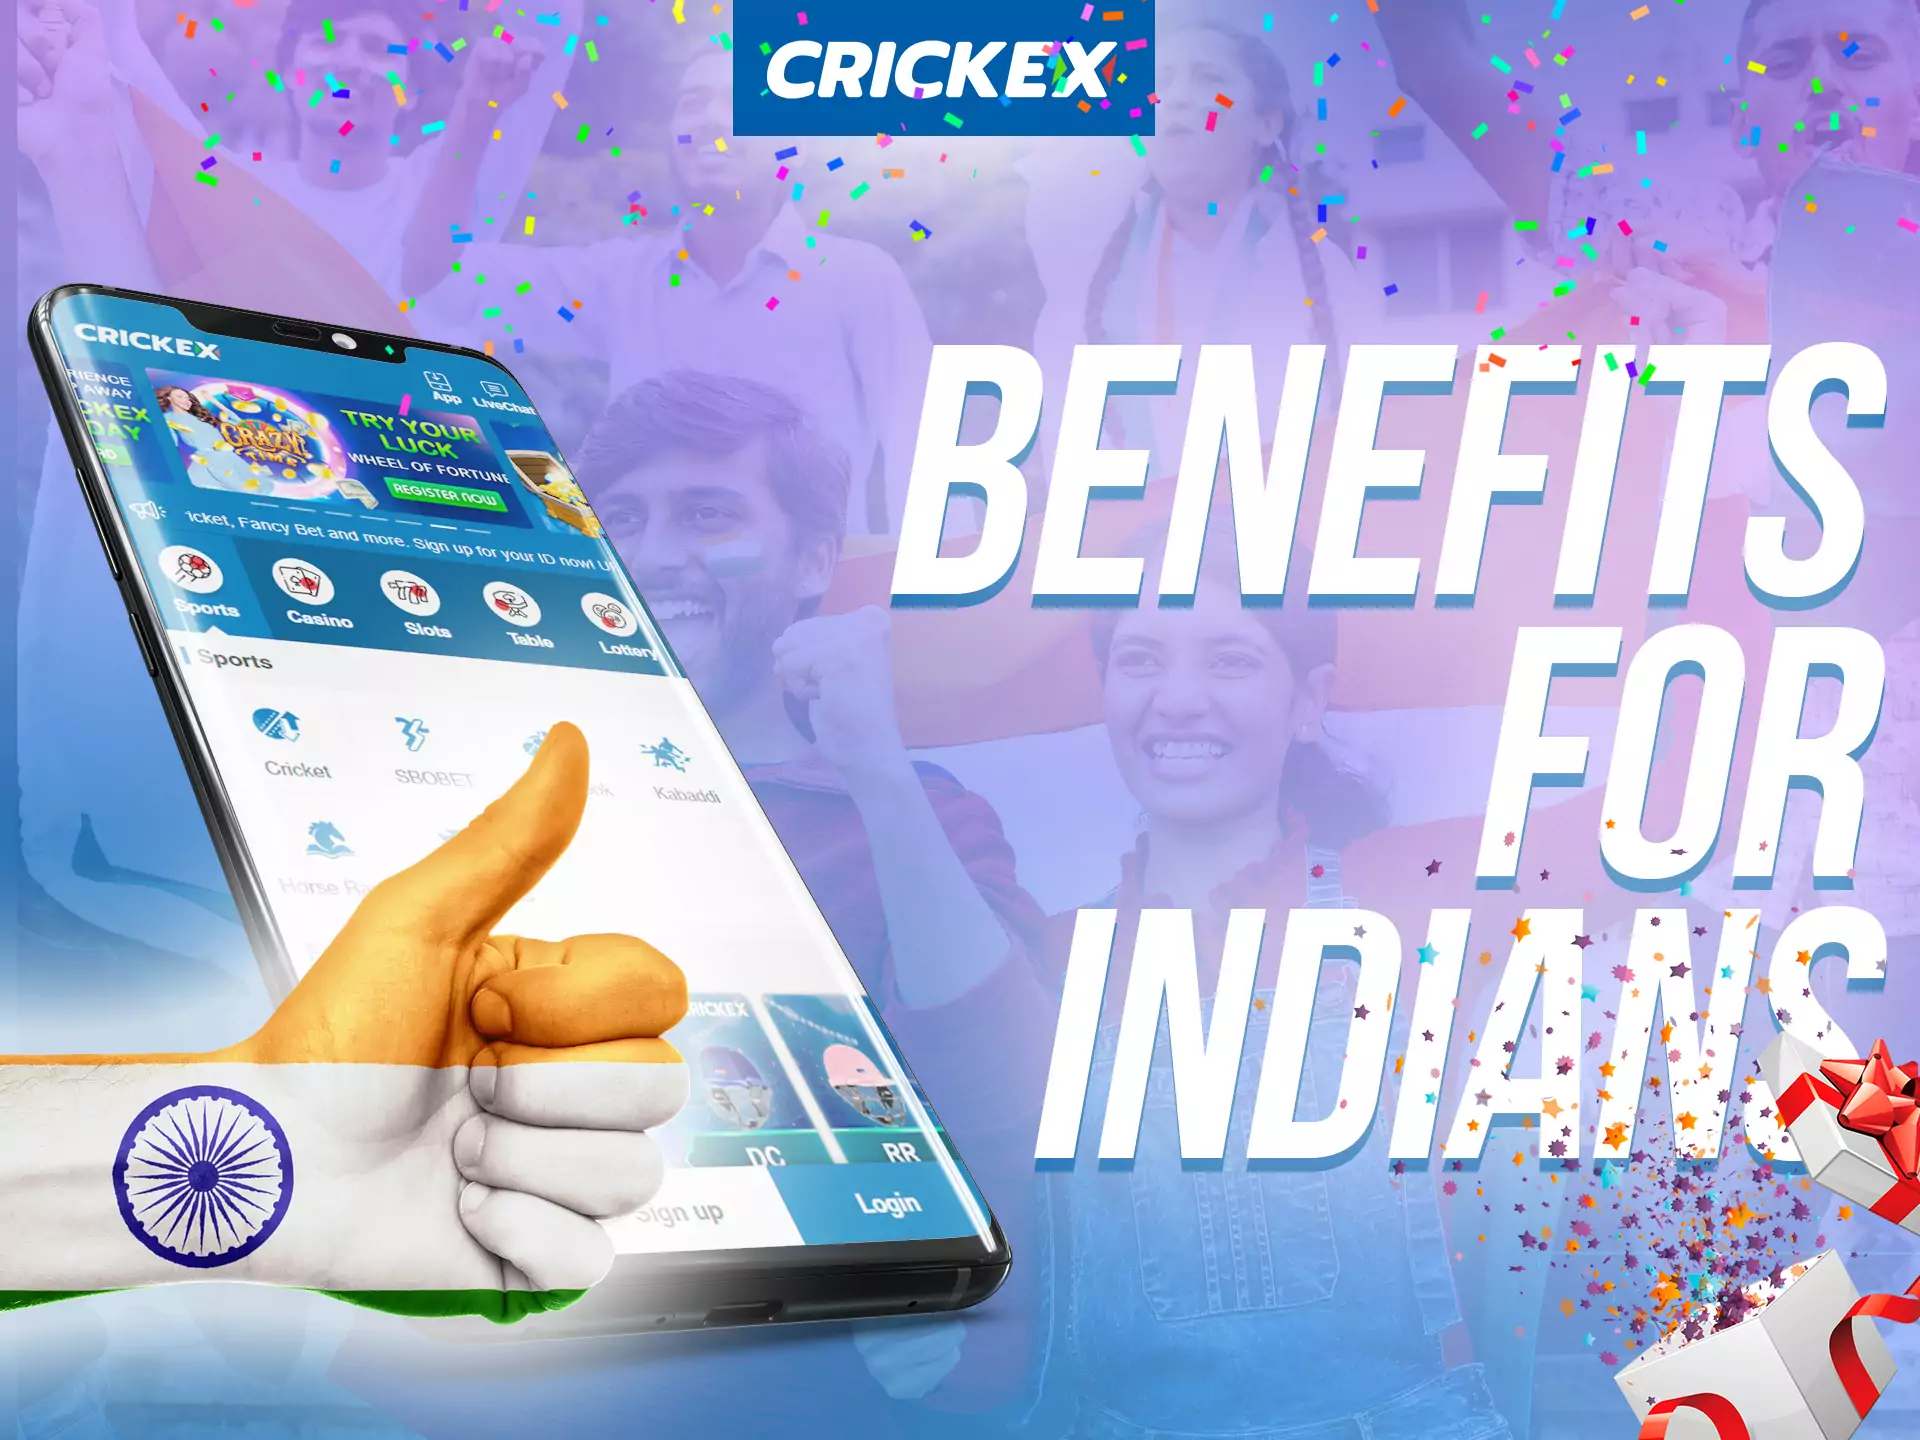 The Crickex app has benefits and bonuses for players from India.